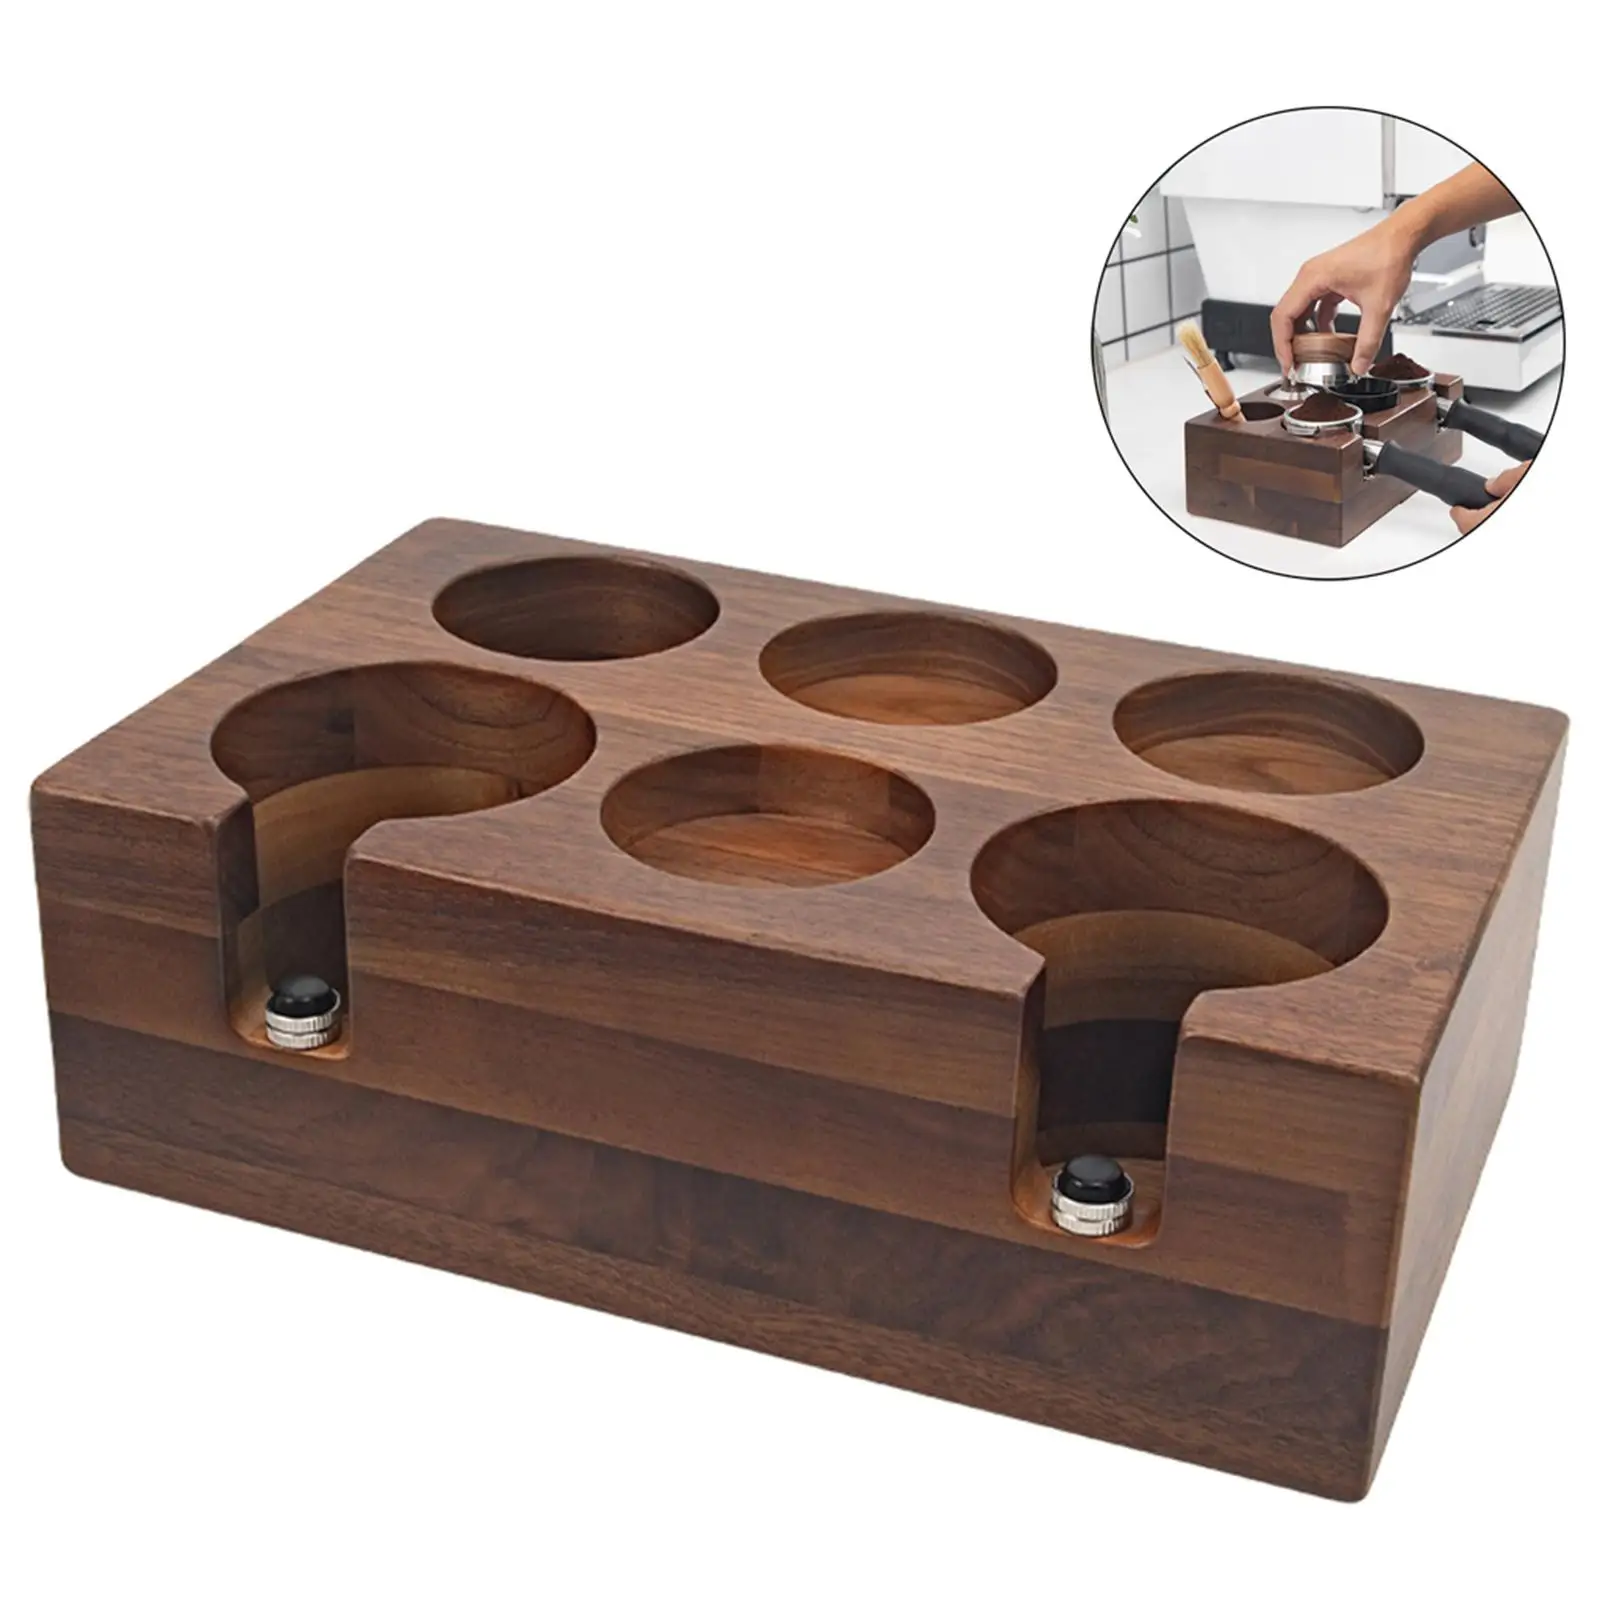 51mm Coffee Tamper Stand Coffeeware Powder Pad for Cafe